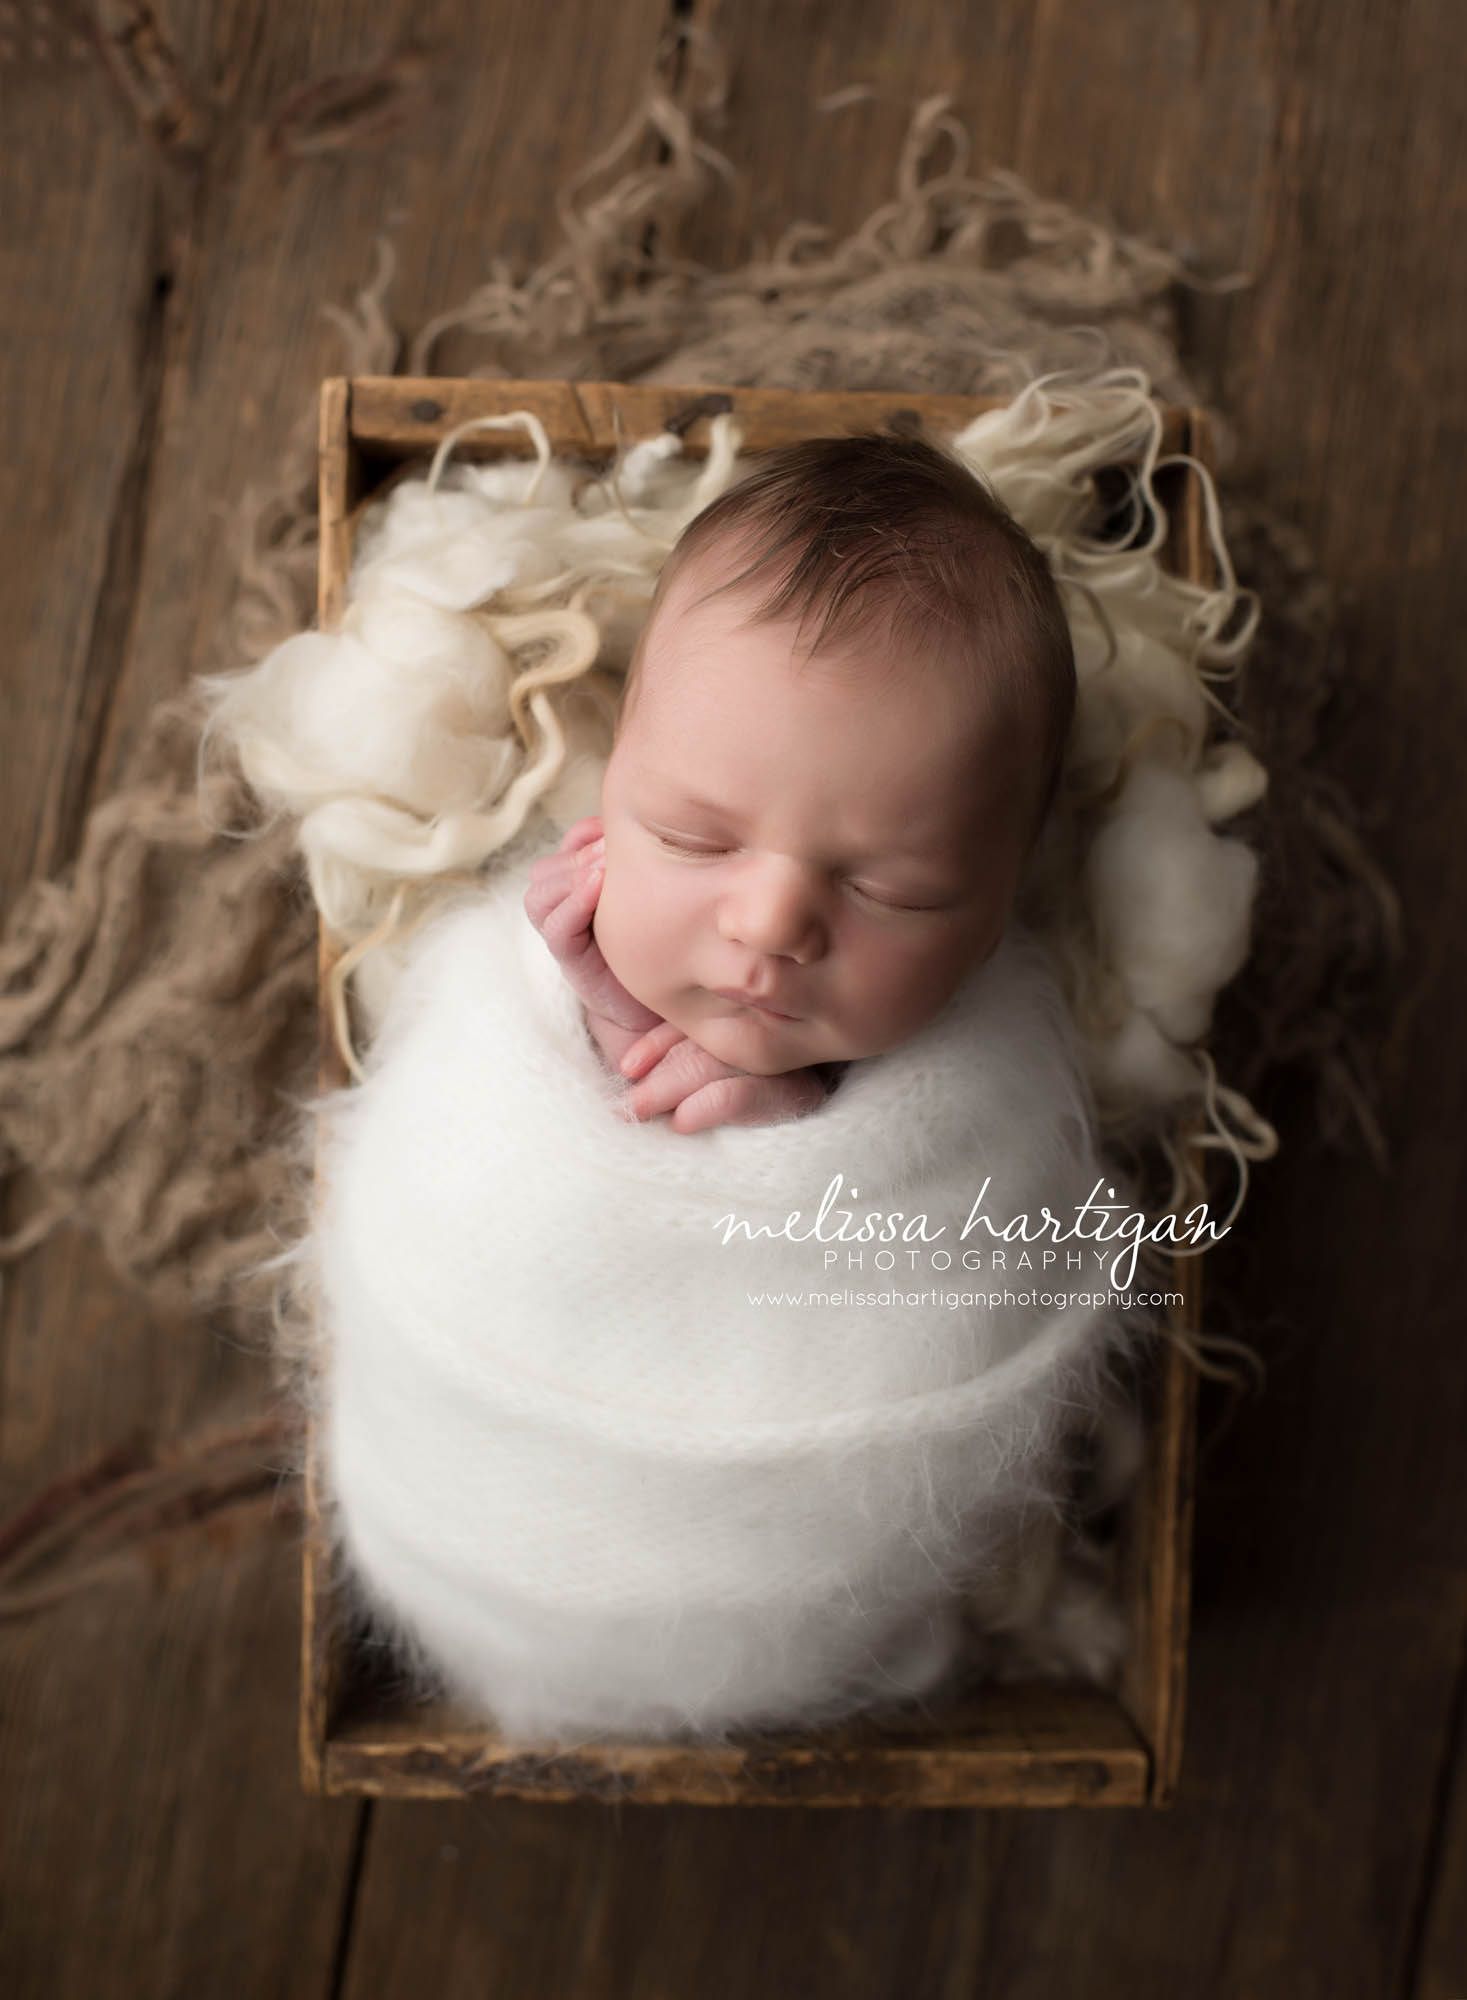 Melissa Hartigan Photography Coventry CT Simply Swaddled Newborn Session baby boy wrapped in white fluffy wrap with hands sticking out sleeping in an antique wooden crate close-up